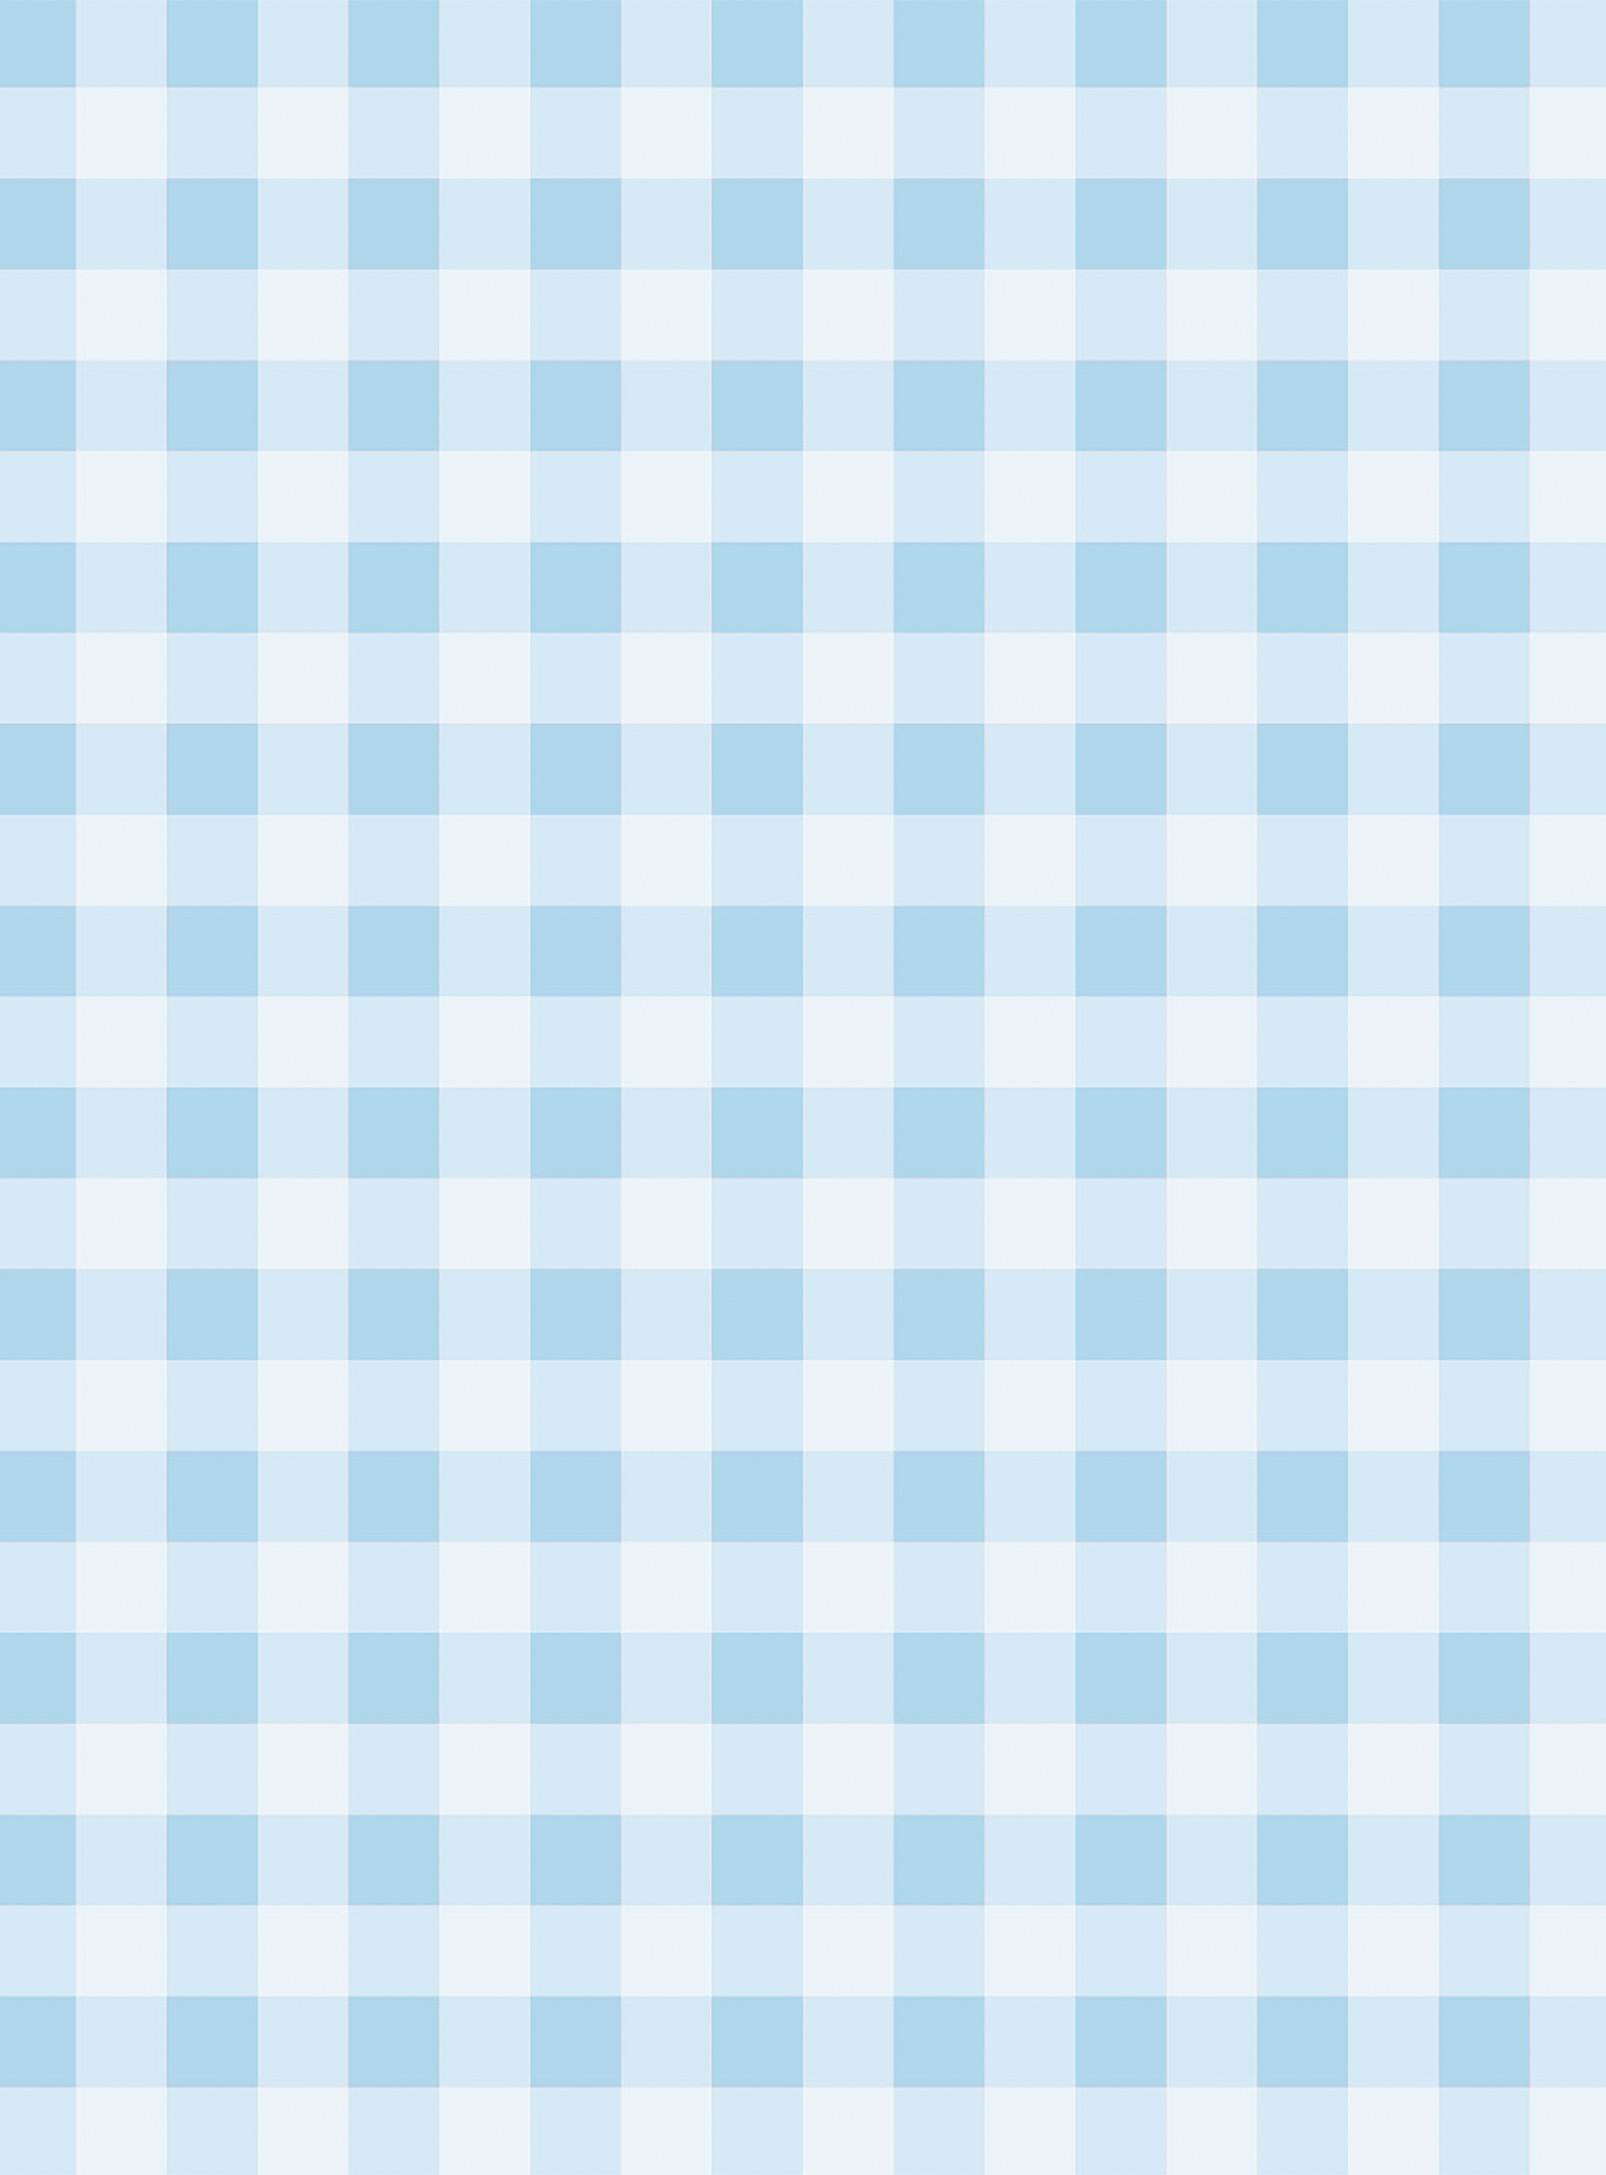 Station D Milk Shake Checkered Wallpaper Strip See Available Sizes In Baby Blue